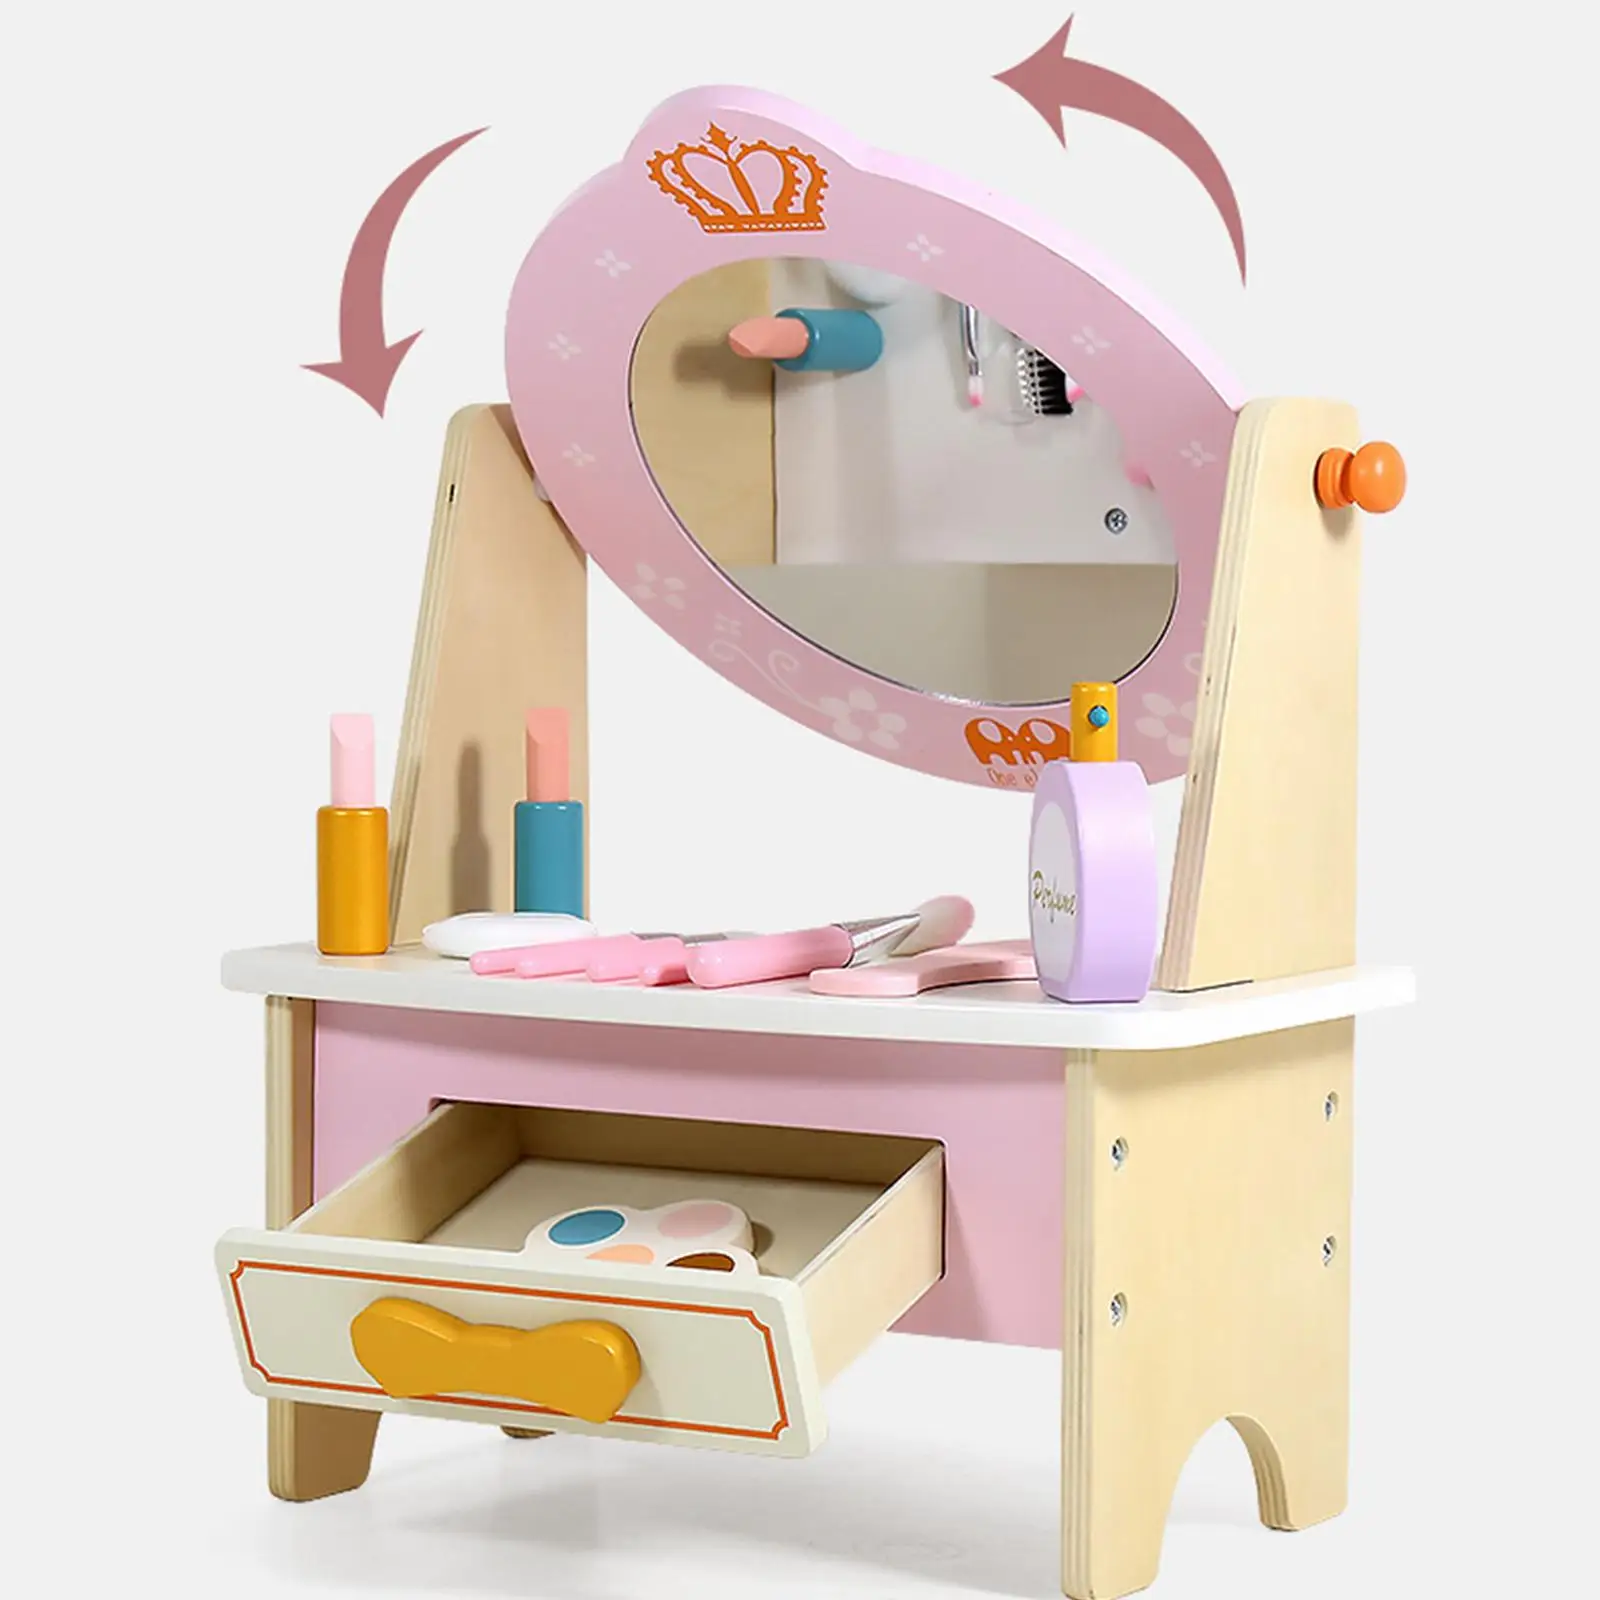 Montessori Simulation Makeup Table Toys Beauty Playset Educational Toys Kids Dress up Table Toy for Toddler Girls Birthday Gifts